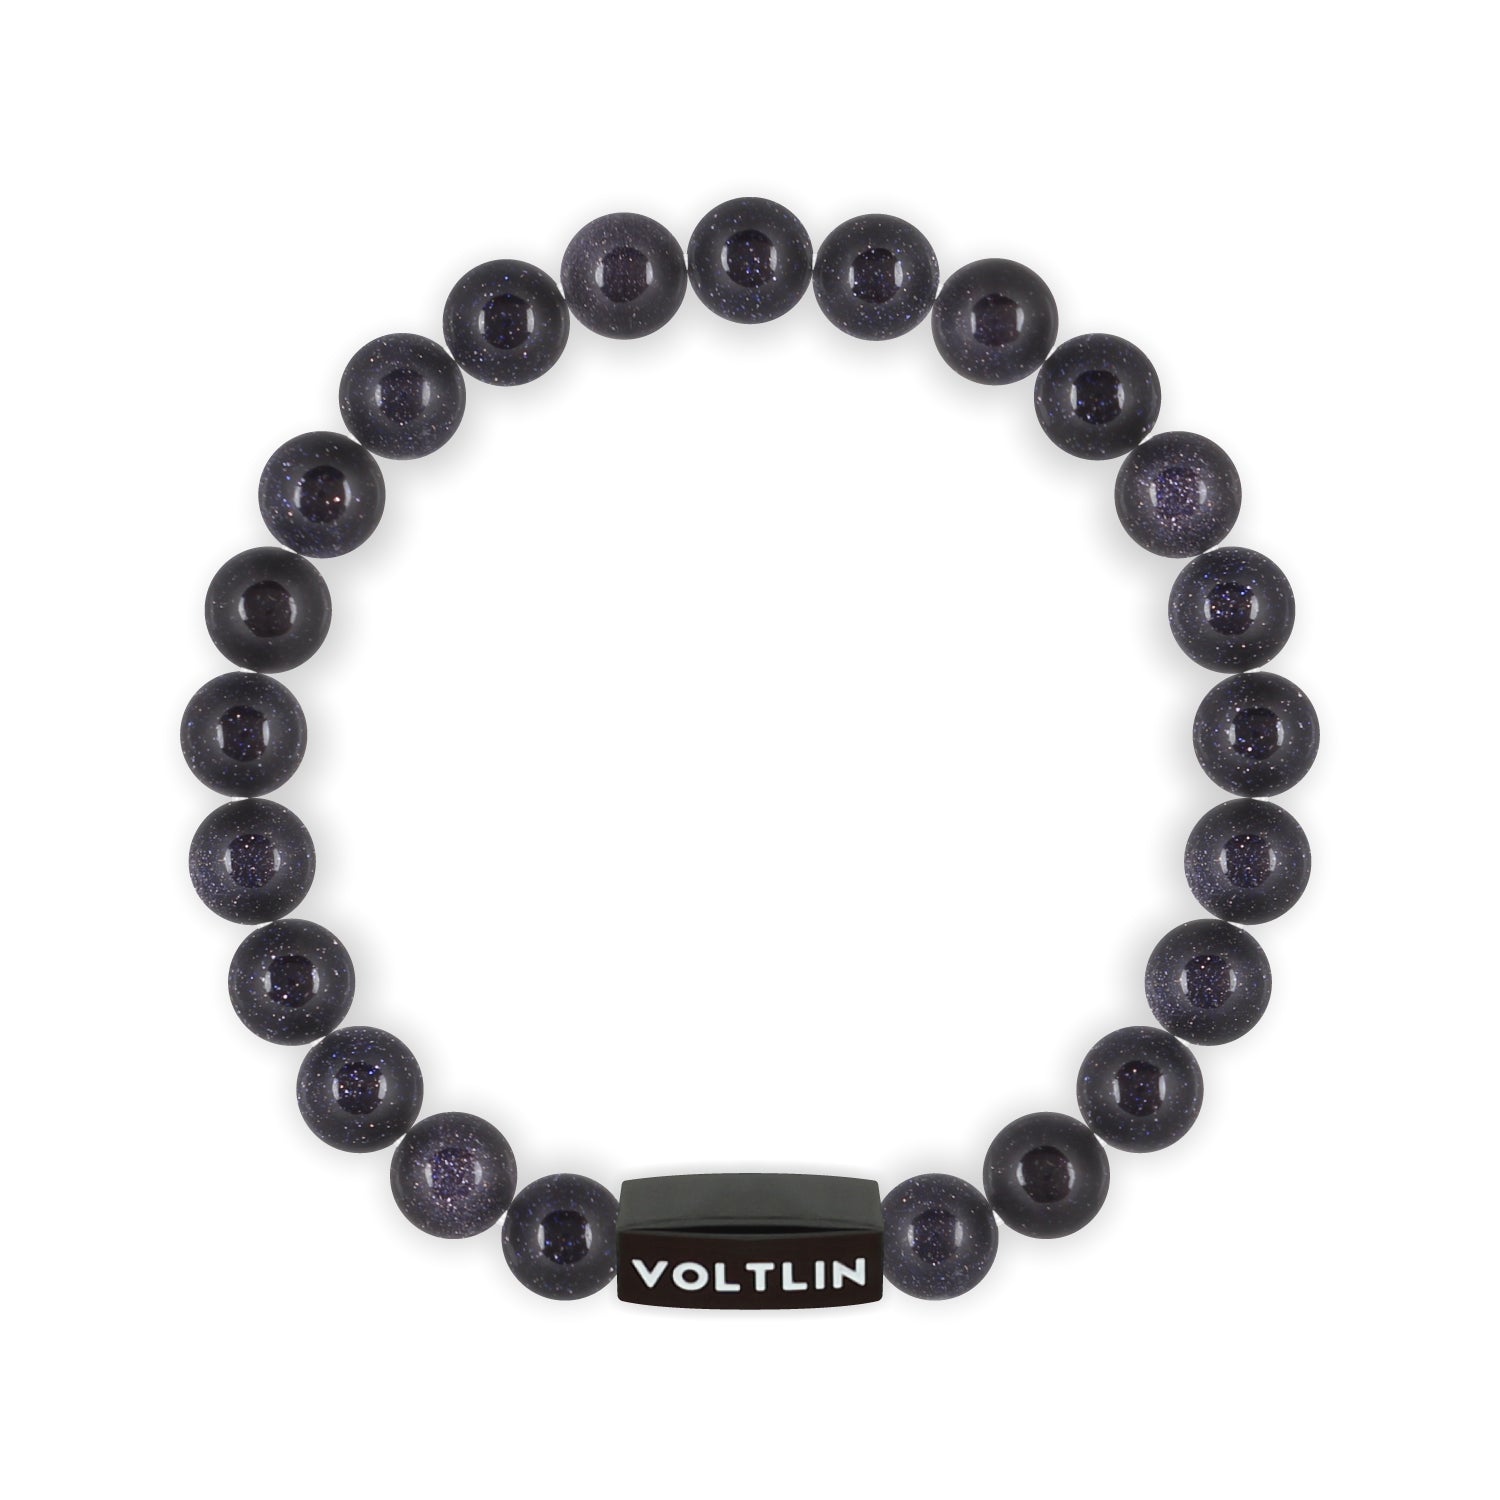 Front view of an 8mm Blue Goldstone crystal beaded stretch bracelet with black stainless steel logo bead made by Voltlin